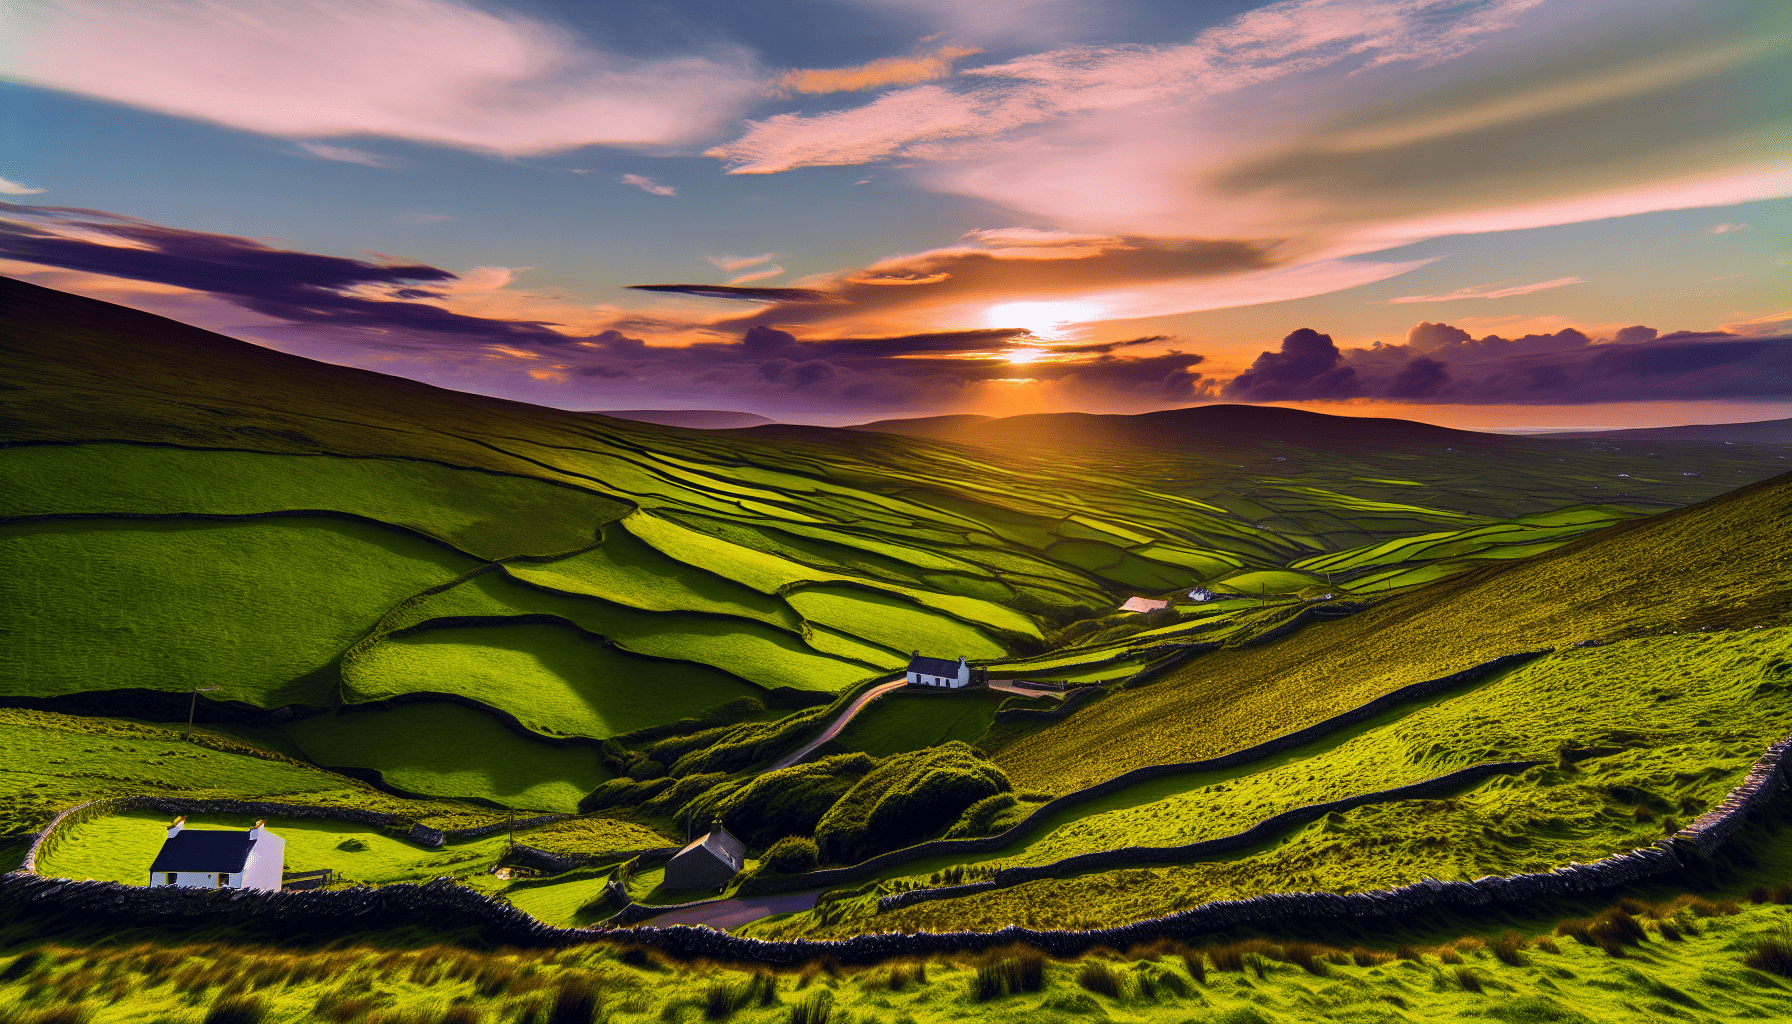 A traditional Irish landscape with rolling hills and a radiant sunset